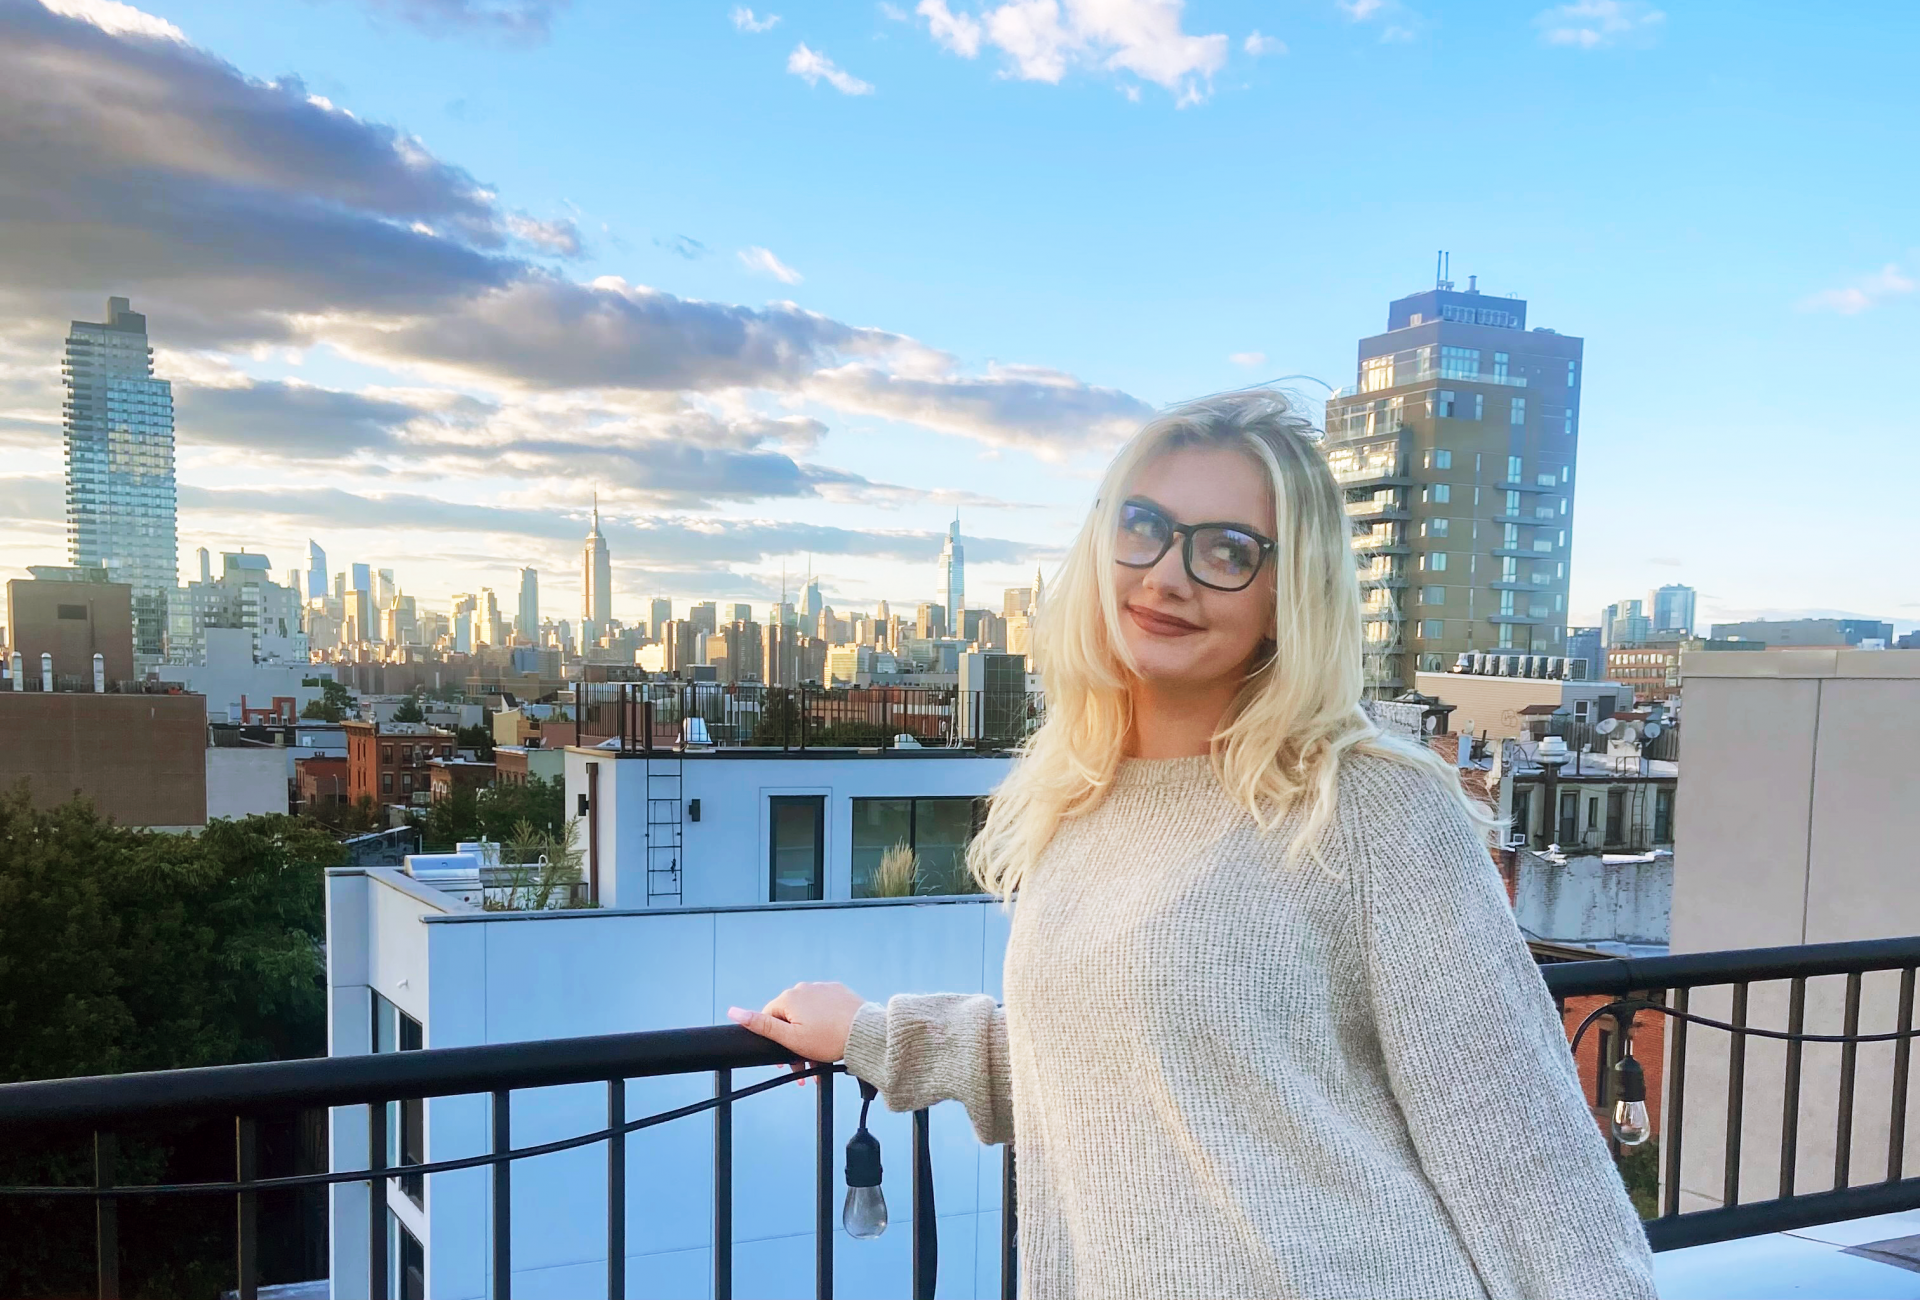 Hannah Hayes stands at a railing as the sun sets over the New York City skyline.